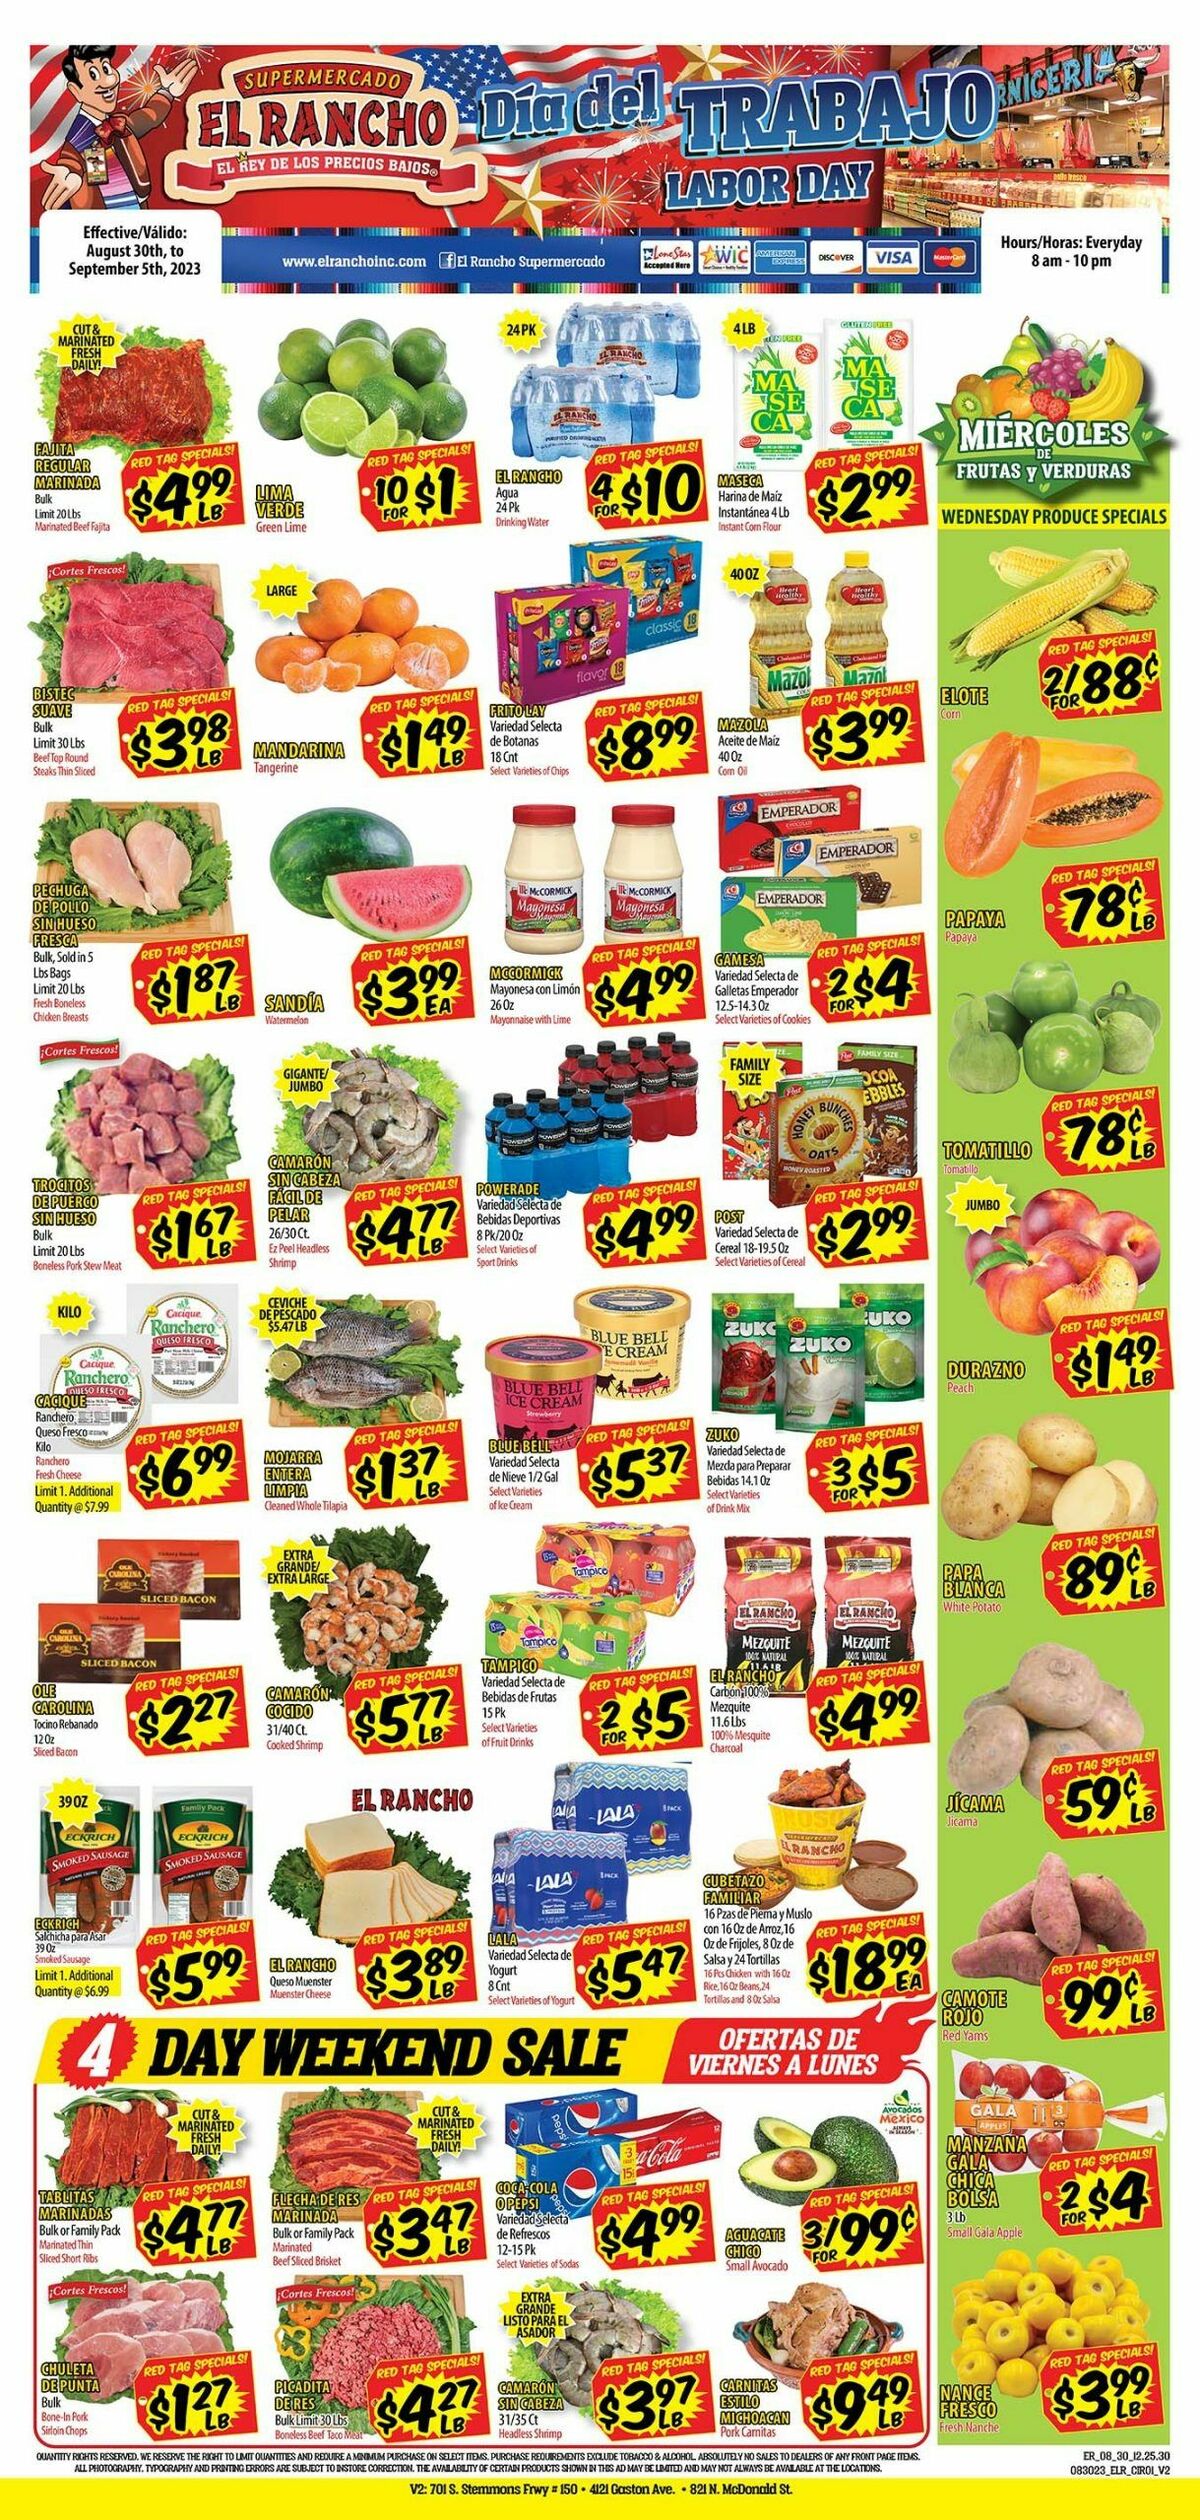 El Rancho Weekly Ad from August 30